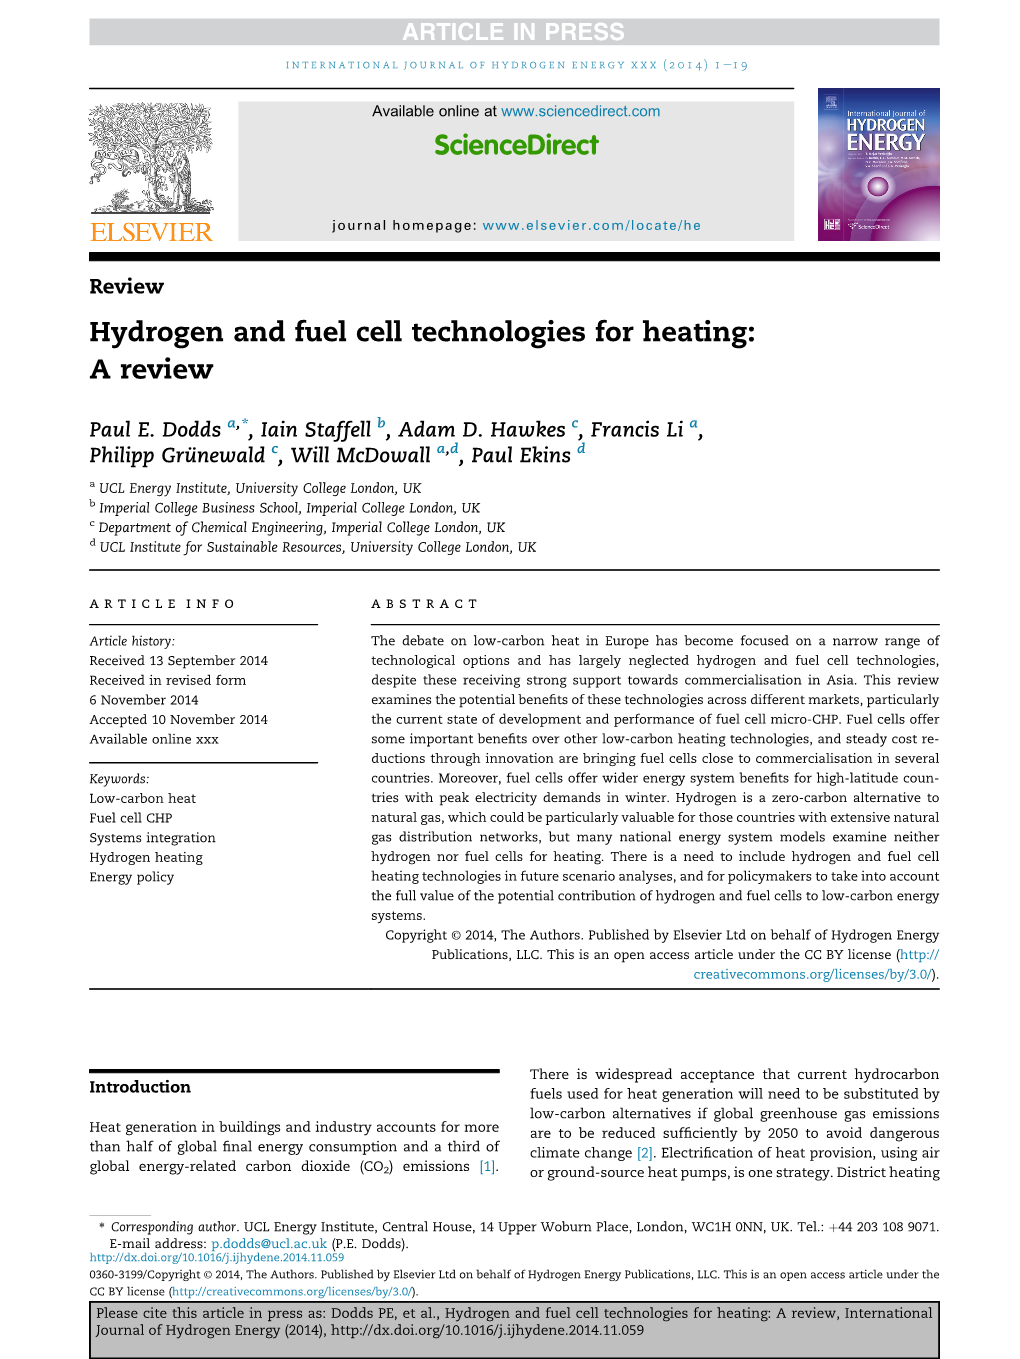 Hydrogen and Fuel Cell Technologies for Heating: a Review